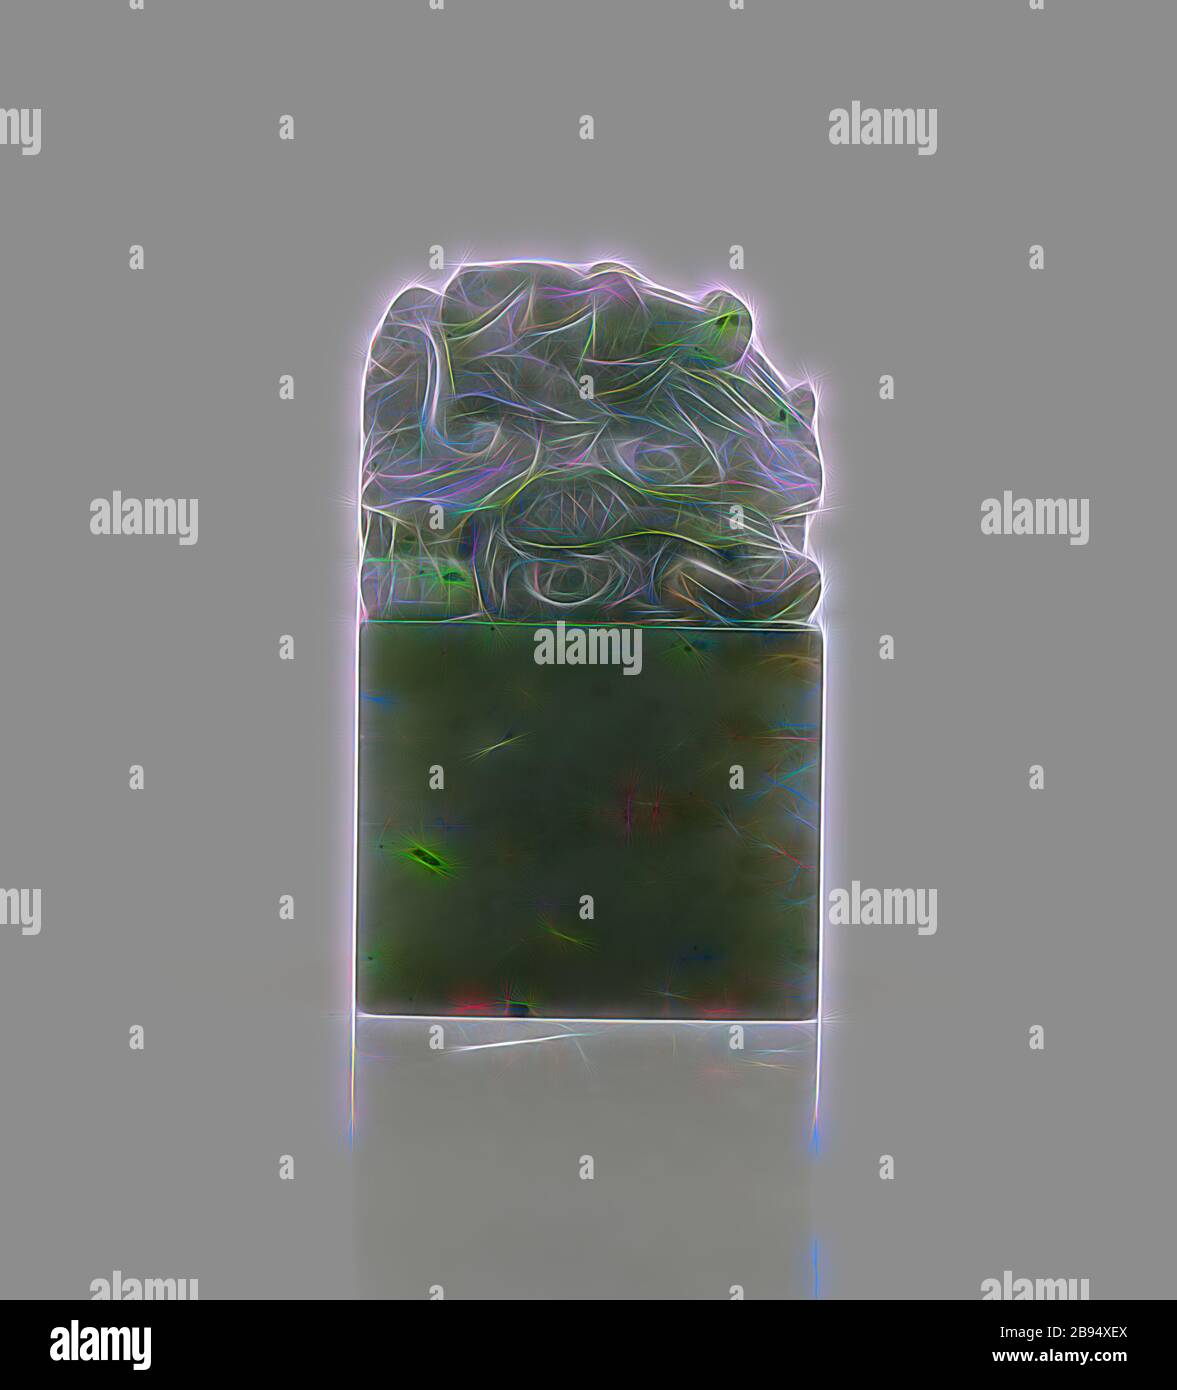 Studio Seal, Qing dynasty, Qing dynasty, 1700s, green nephrite, No measurement details., Asian Art, Reimagined by Gibon, design of warm cheerful glowing of brightness and light rays radiance. Classic art reinvented with a modern twist. Photography inspired by futurism, embracing dynamic energy of modern technology, movement, speed and revolutionize culture. Stock Photo